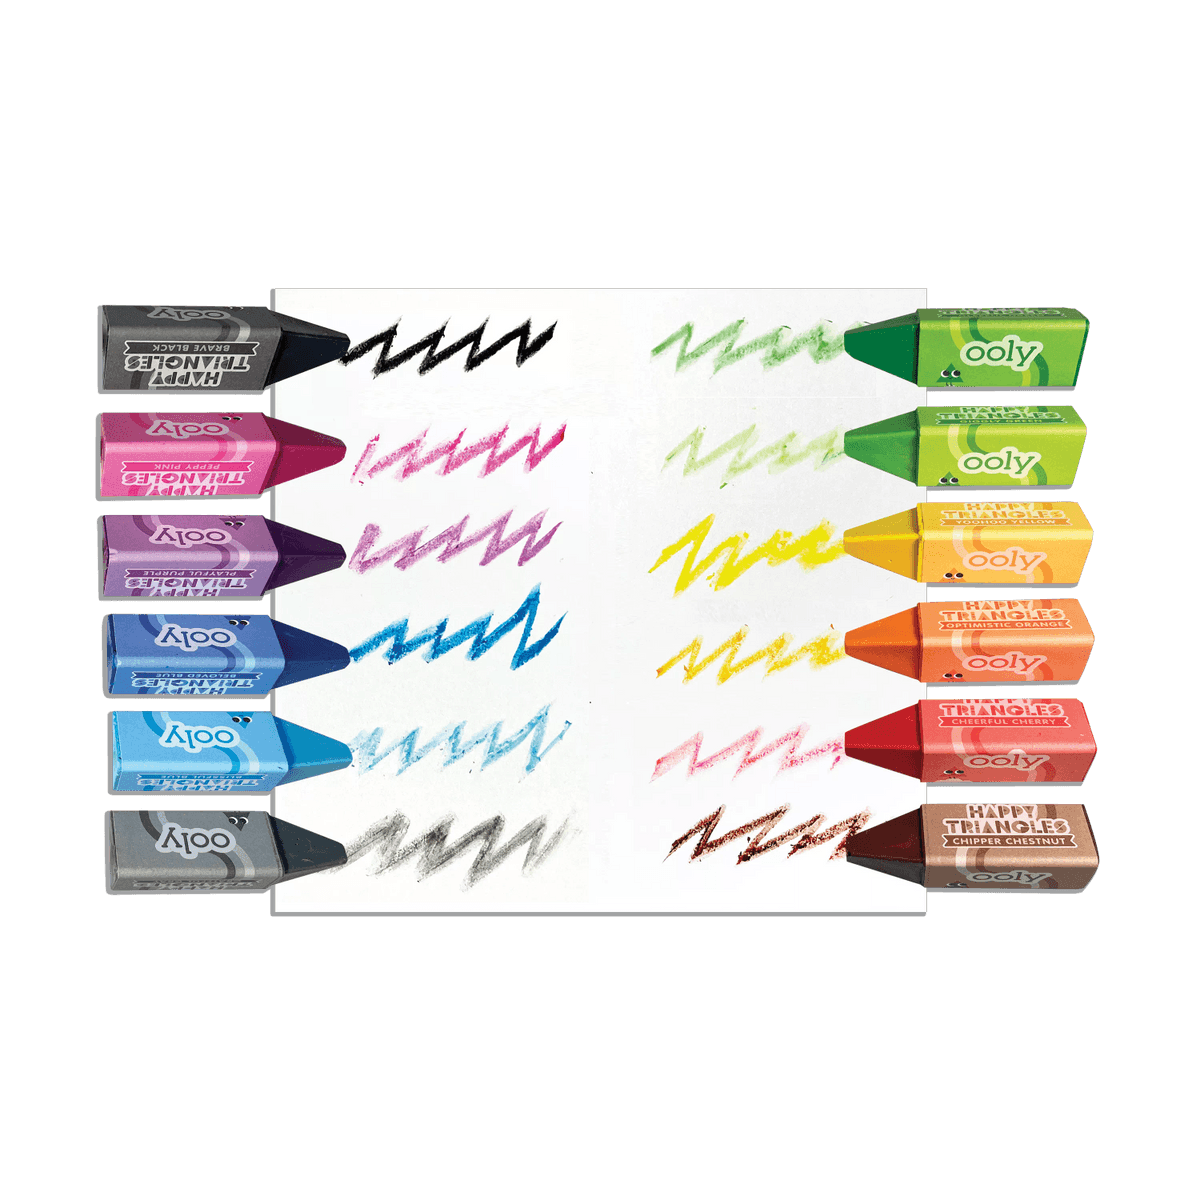 OOLY - Oodles of doodles with these watercolor gel crayons that double as a  paint and coloring tool alike 🌈🖍 Rainbow Sparkle Gel Crayons are made  with a solidified gel that makes